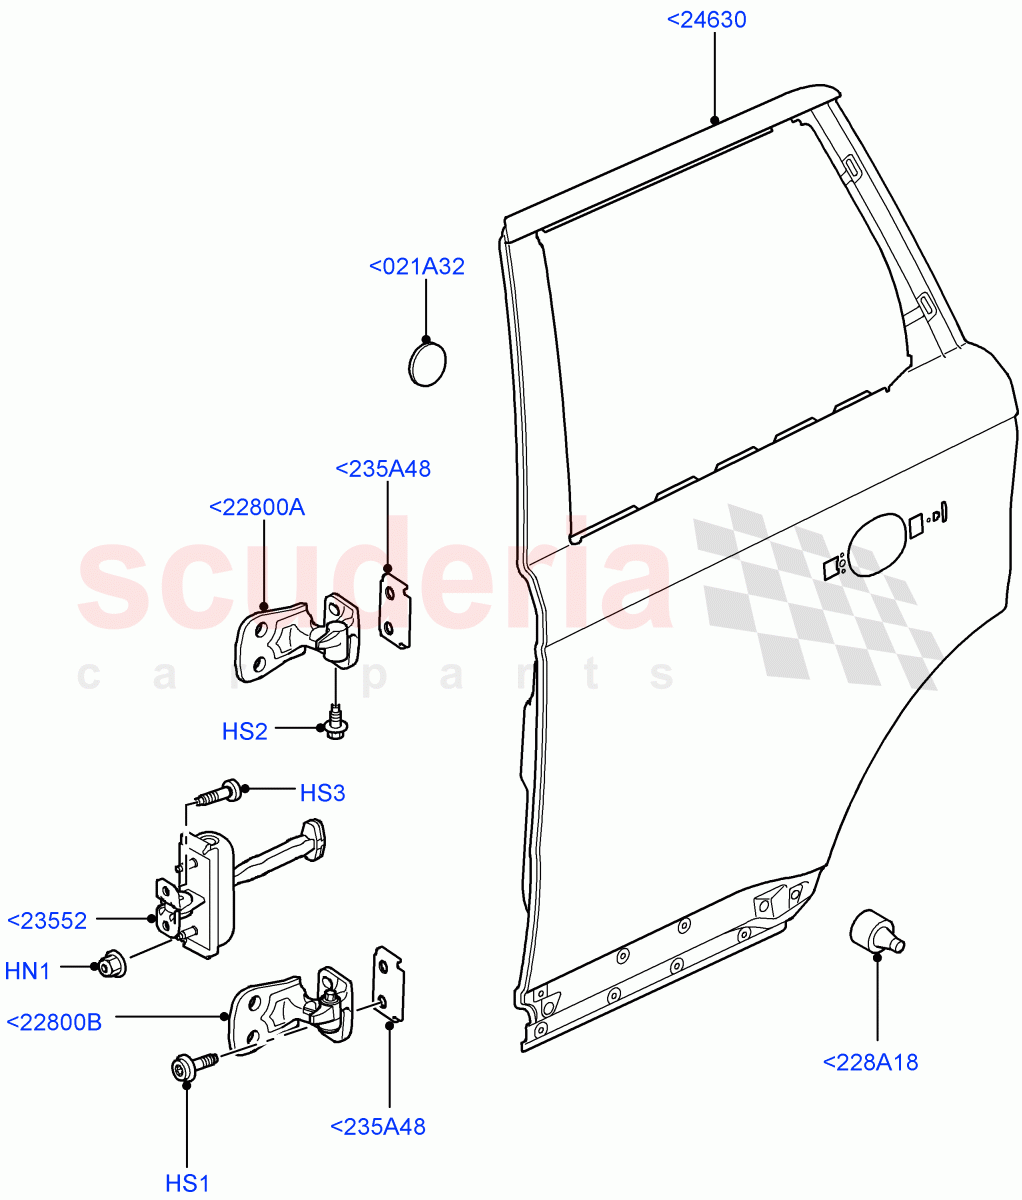 Rear Doors, Hinges & Weatherstrips(Door And Fixings)((V)FROMAA000001) of Land Rover Land Rover Range Rover Sport (2010-2013) [5.0 OHC SGDI SC V8 Petrol]